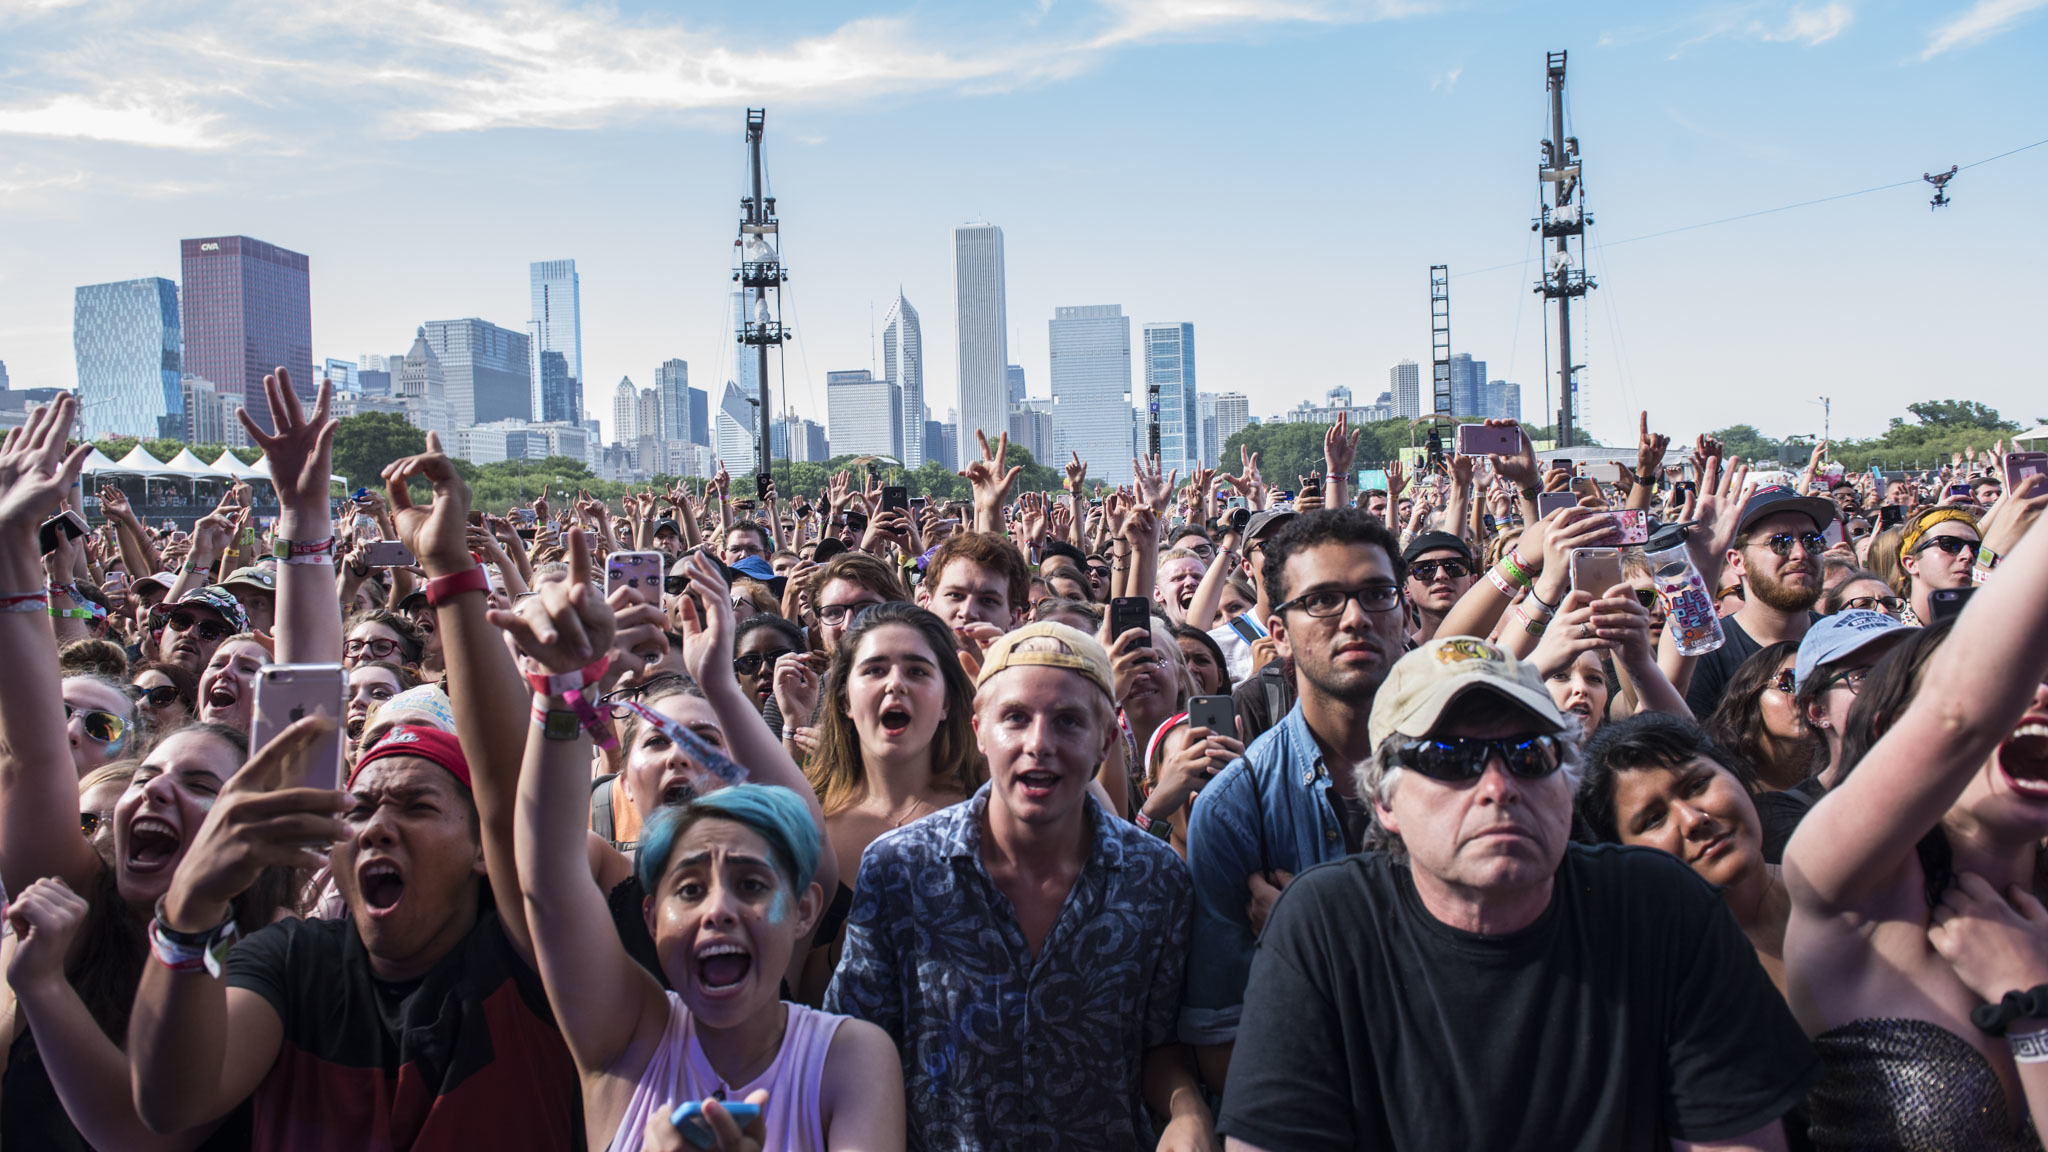 Unvaccinated People Who Went To Lolla Should Get Tested For COVID — But So  Should Anyone Who Thinks They're Sick, Chicago's Doc Says